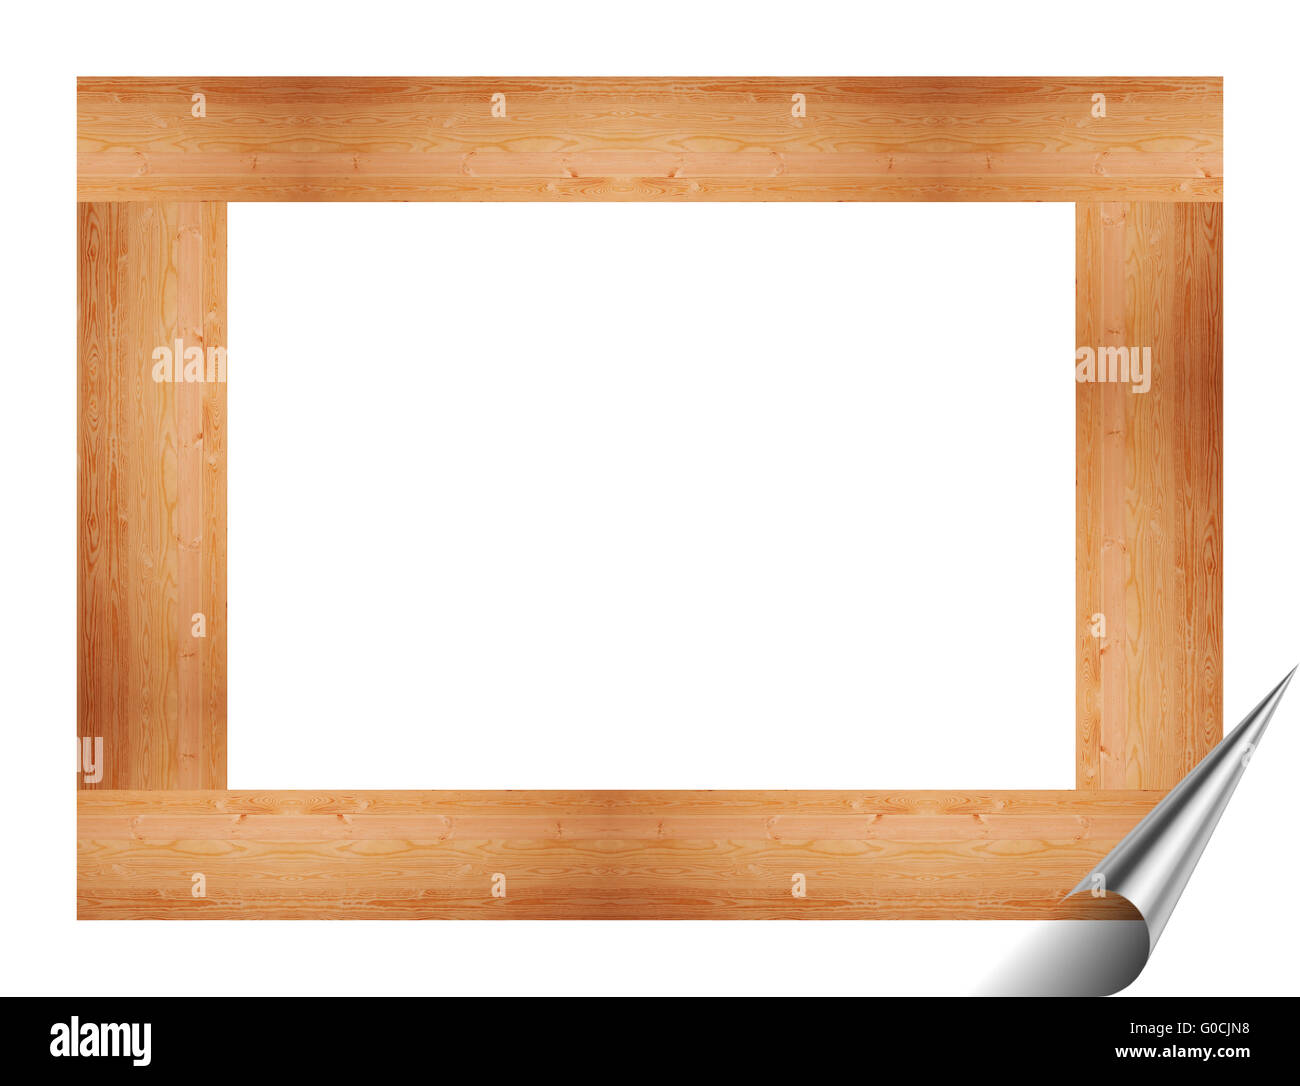 Wooden frame for pictures and paintings Stock Photo